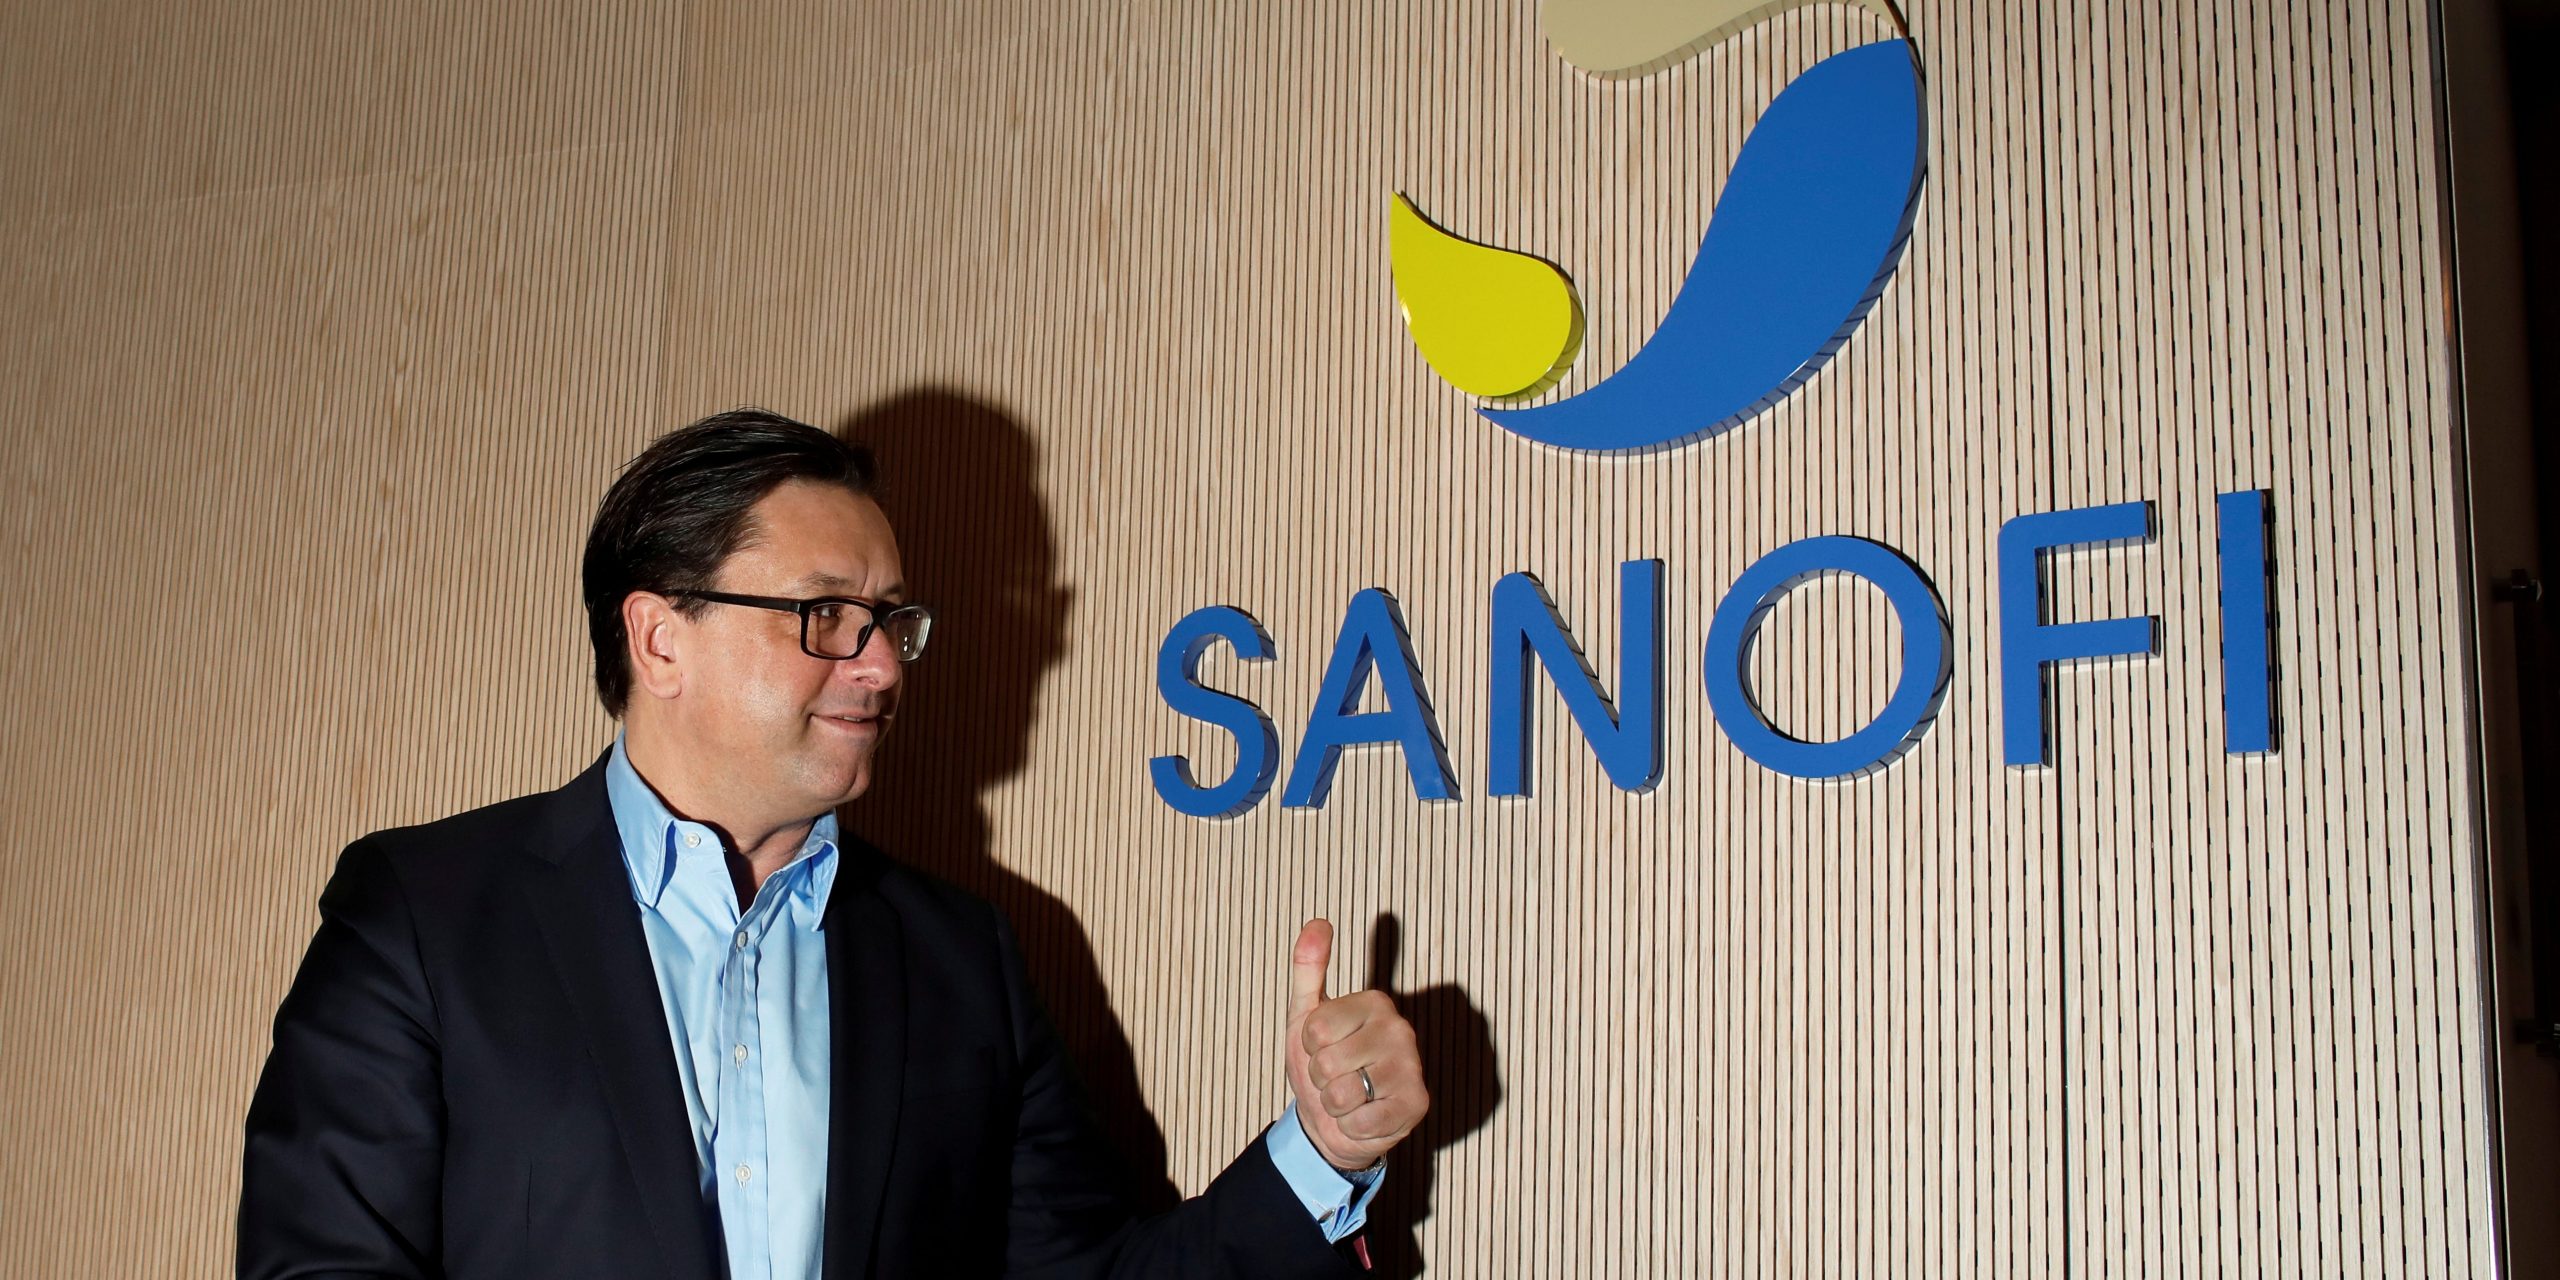 FILE PHOTO: Paul Hudson, chief executive officer of Sanofi, poses during the annual results news conference in Paris, France, February 6, 2020. REUTERS/Benoit Tessier